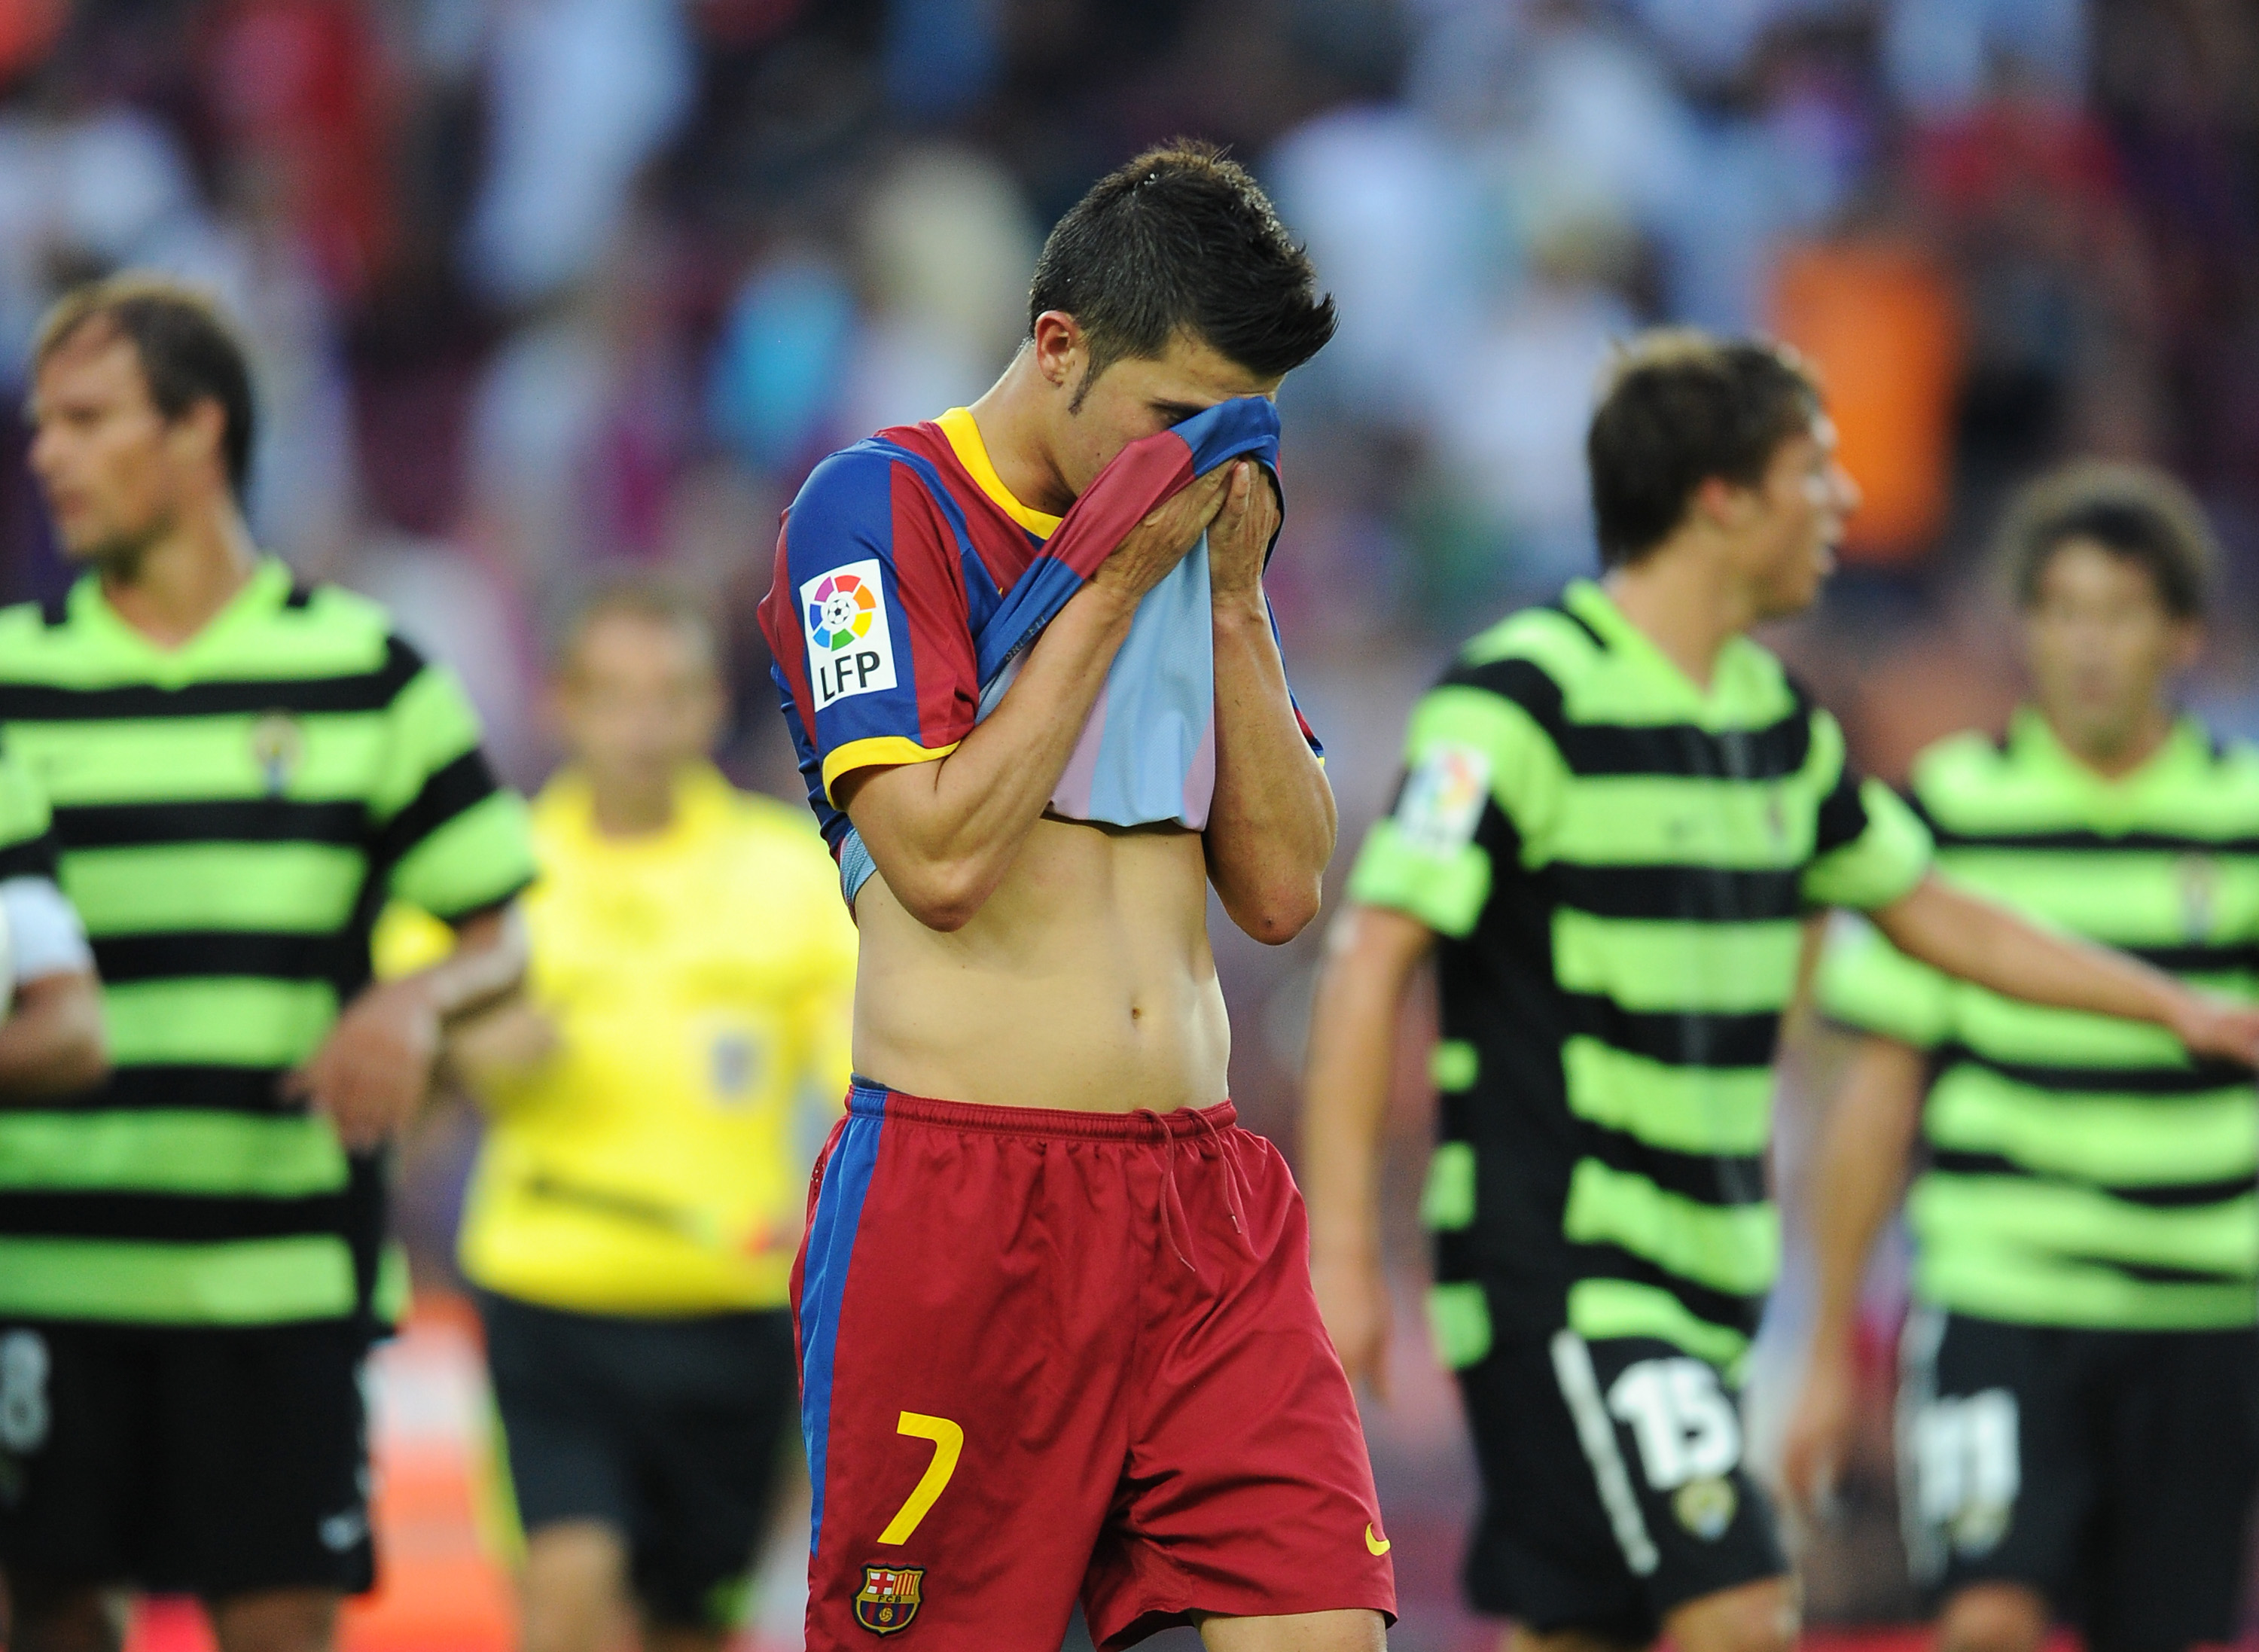 BARCELONA, SPAIN - SEPTEMBER 11:  David Villa of Barcelona trudges off the pitch at the end of the La Liga match between Barcelona and Hercules at the Camp Nou stadium on September 11, 2010 in Barcelona, Spain. Barcelona lost the match 2-0.  (Photo by Jas